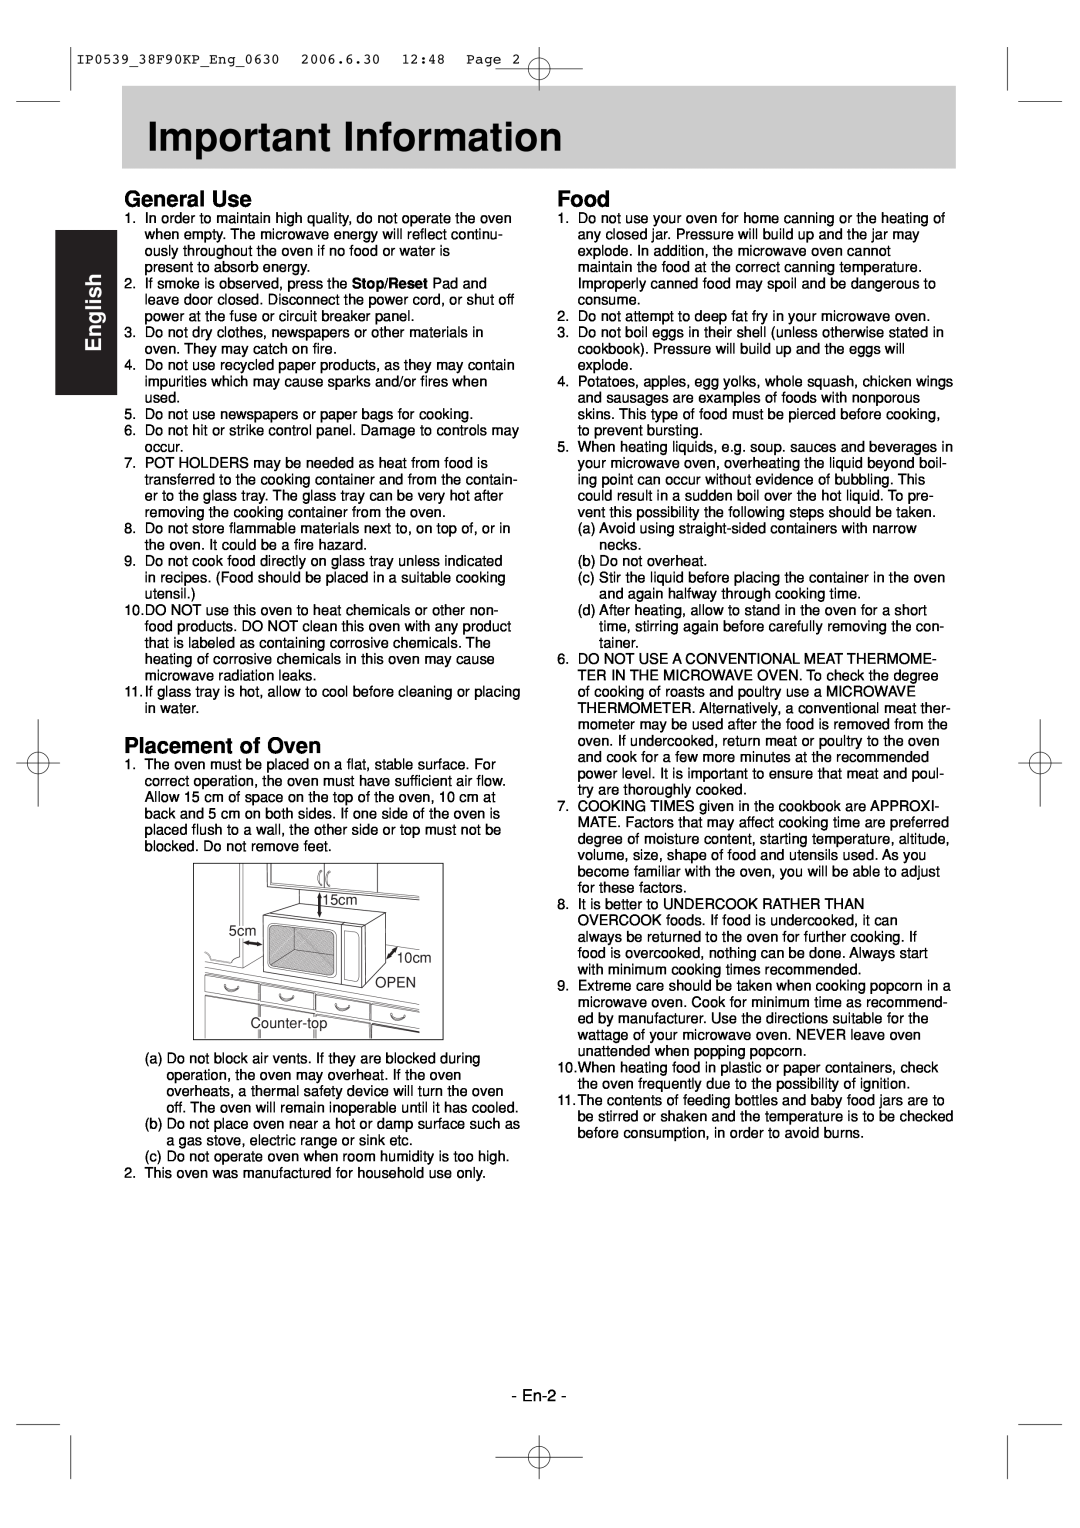 Panasonic NN-ST686S operating instructions Important Information, General Use, Placement of Oven, Food, En-2, English 